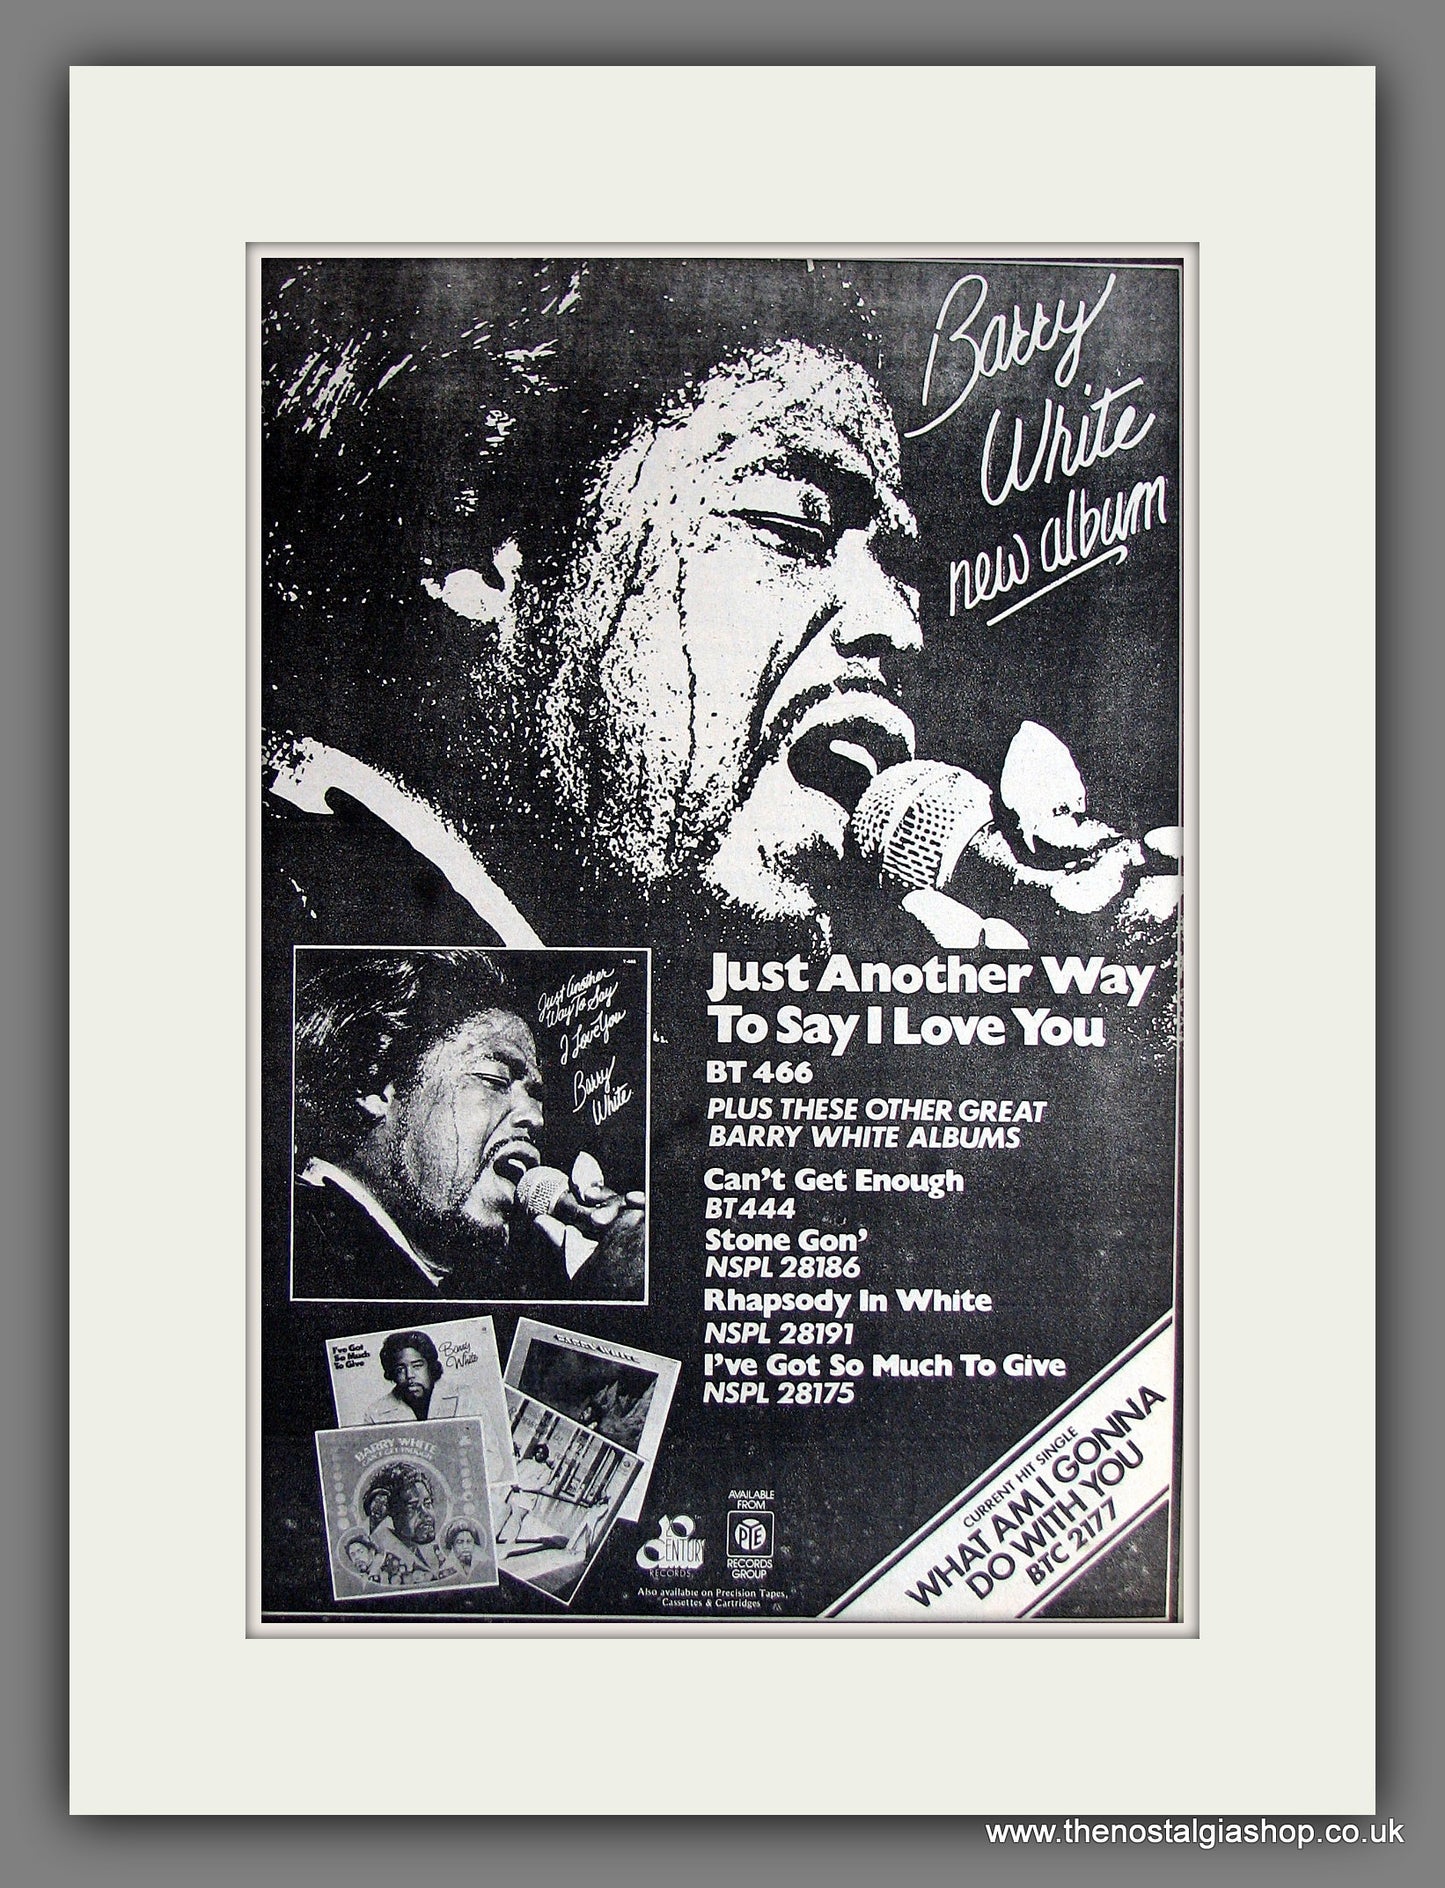 Barry White Just Another Way To Say I Love You. Vintage Advert 1975 (ref AD14055)